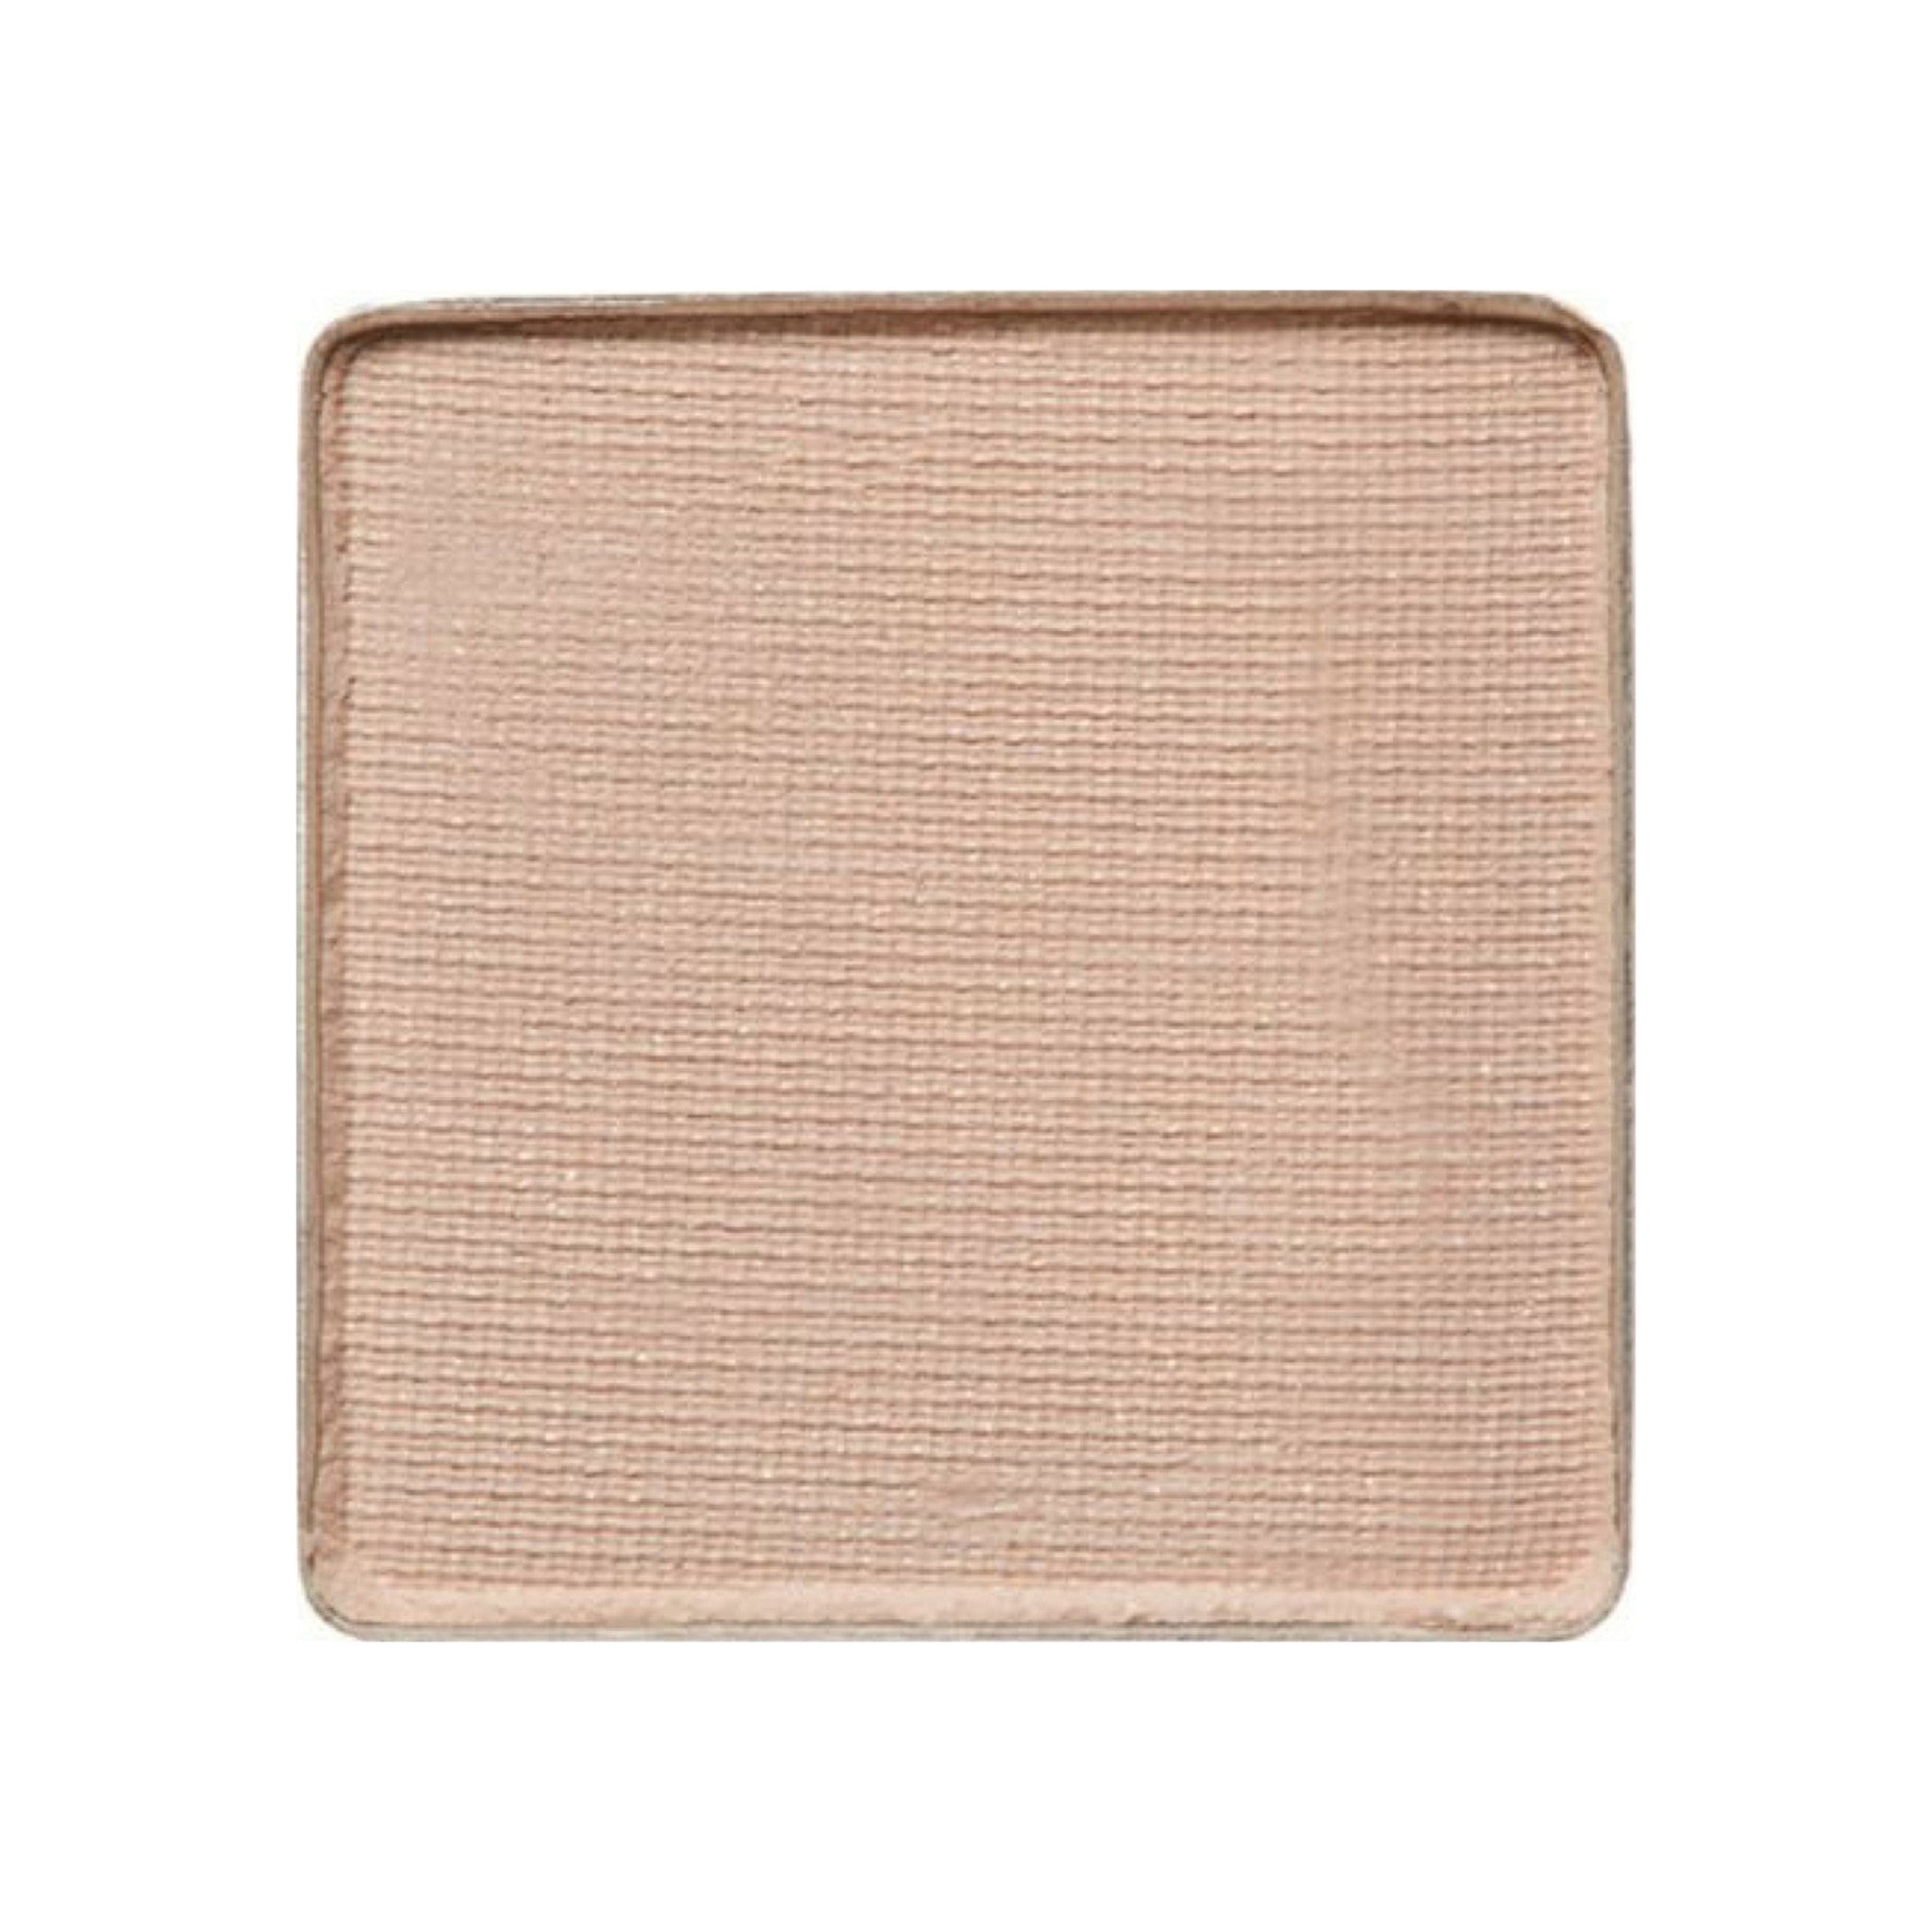 Trish McEvoy Eye Shadow Refill Color/Shade variant: Soft Peach main image. This product is in the color nude